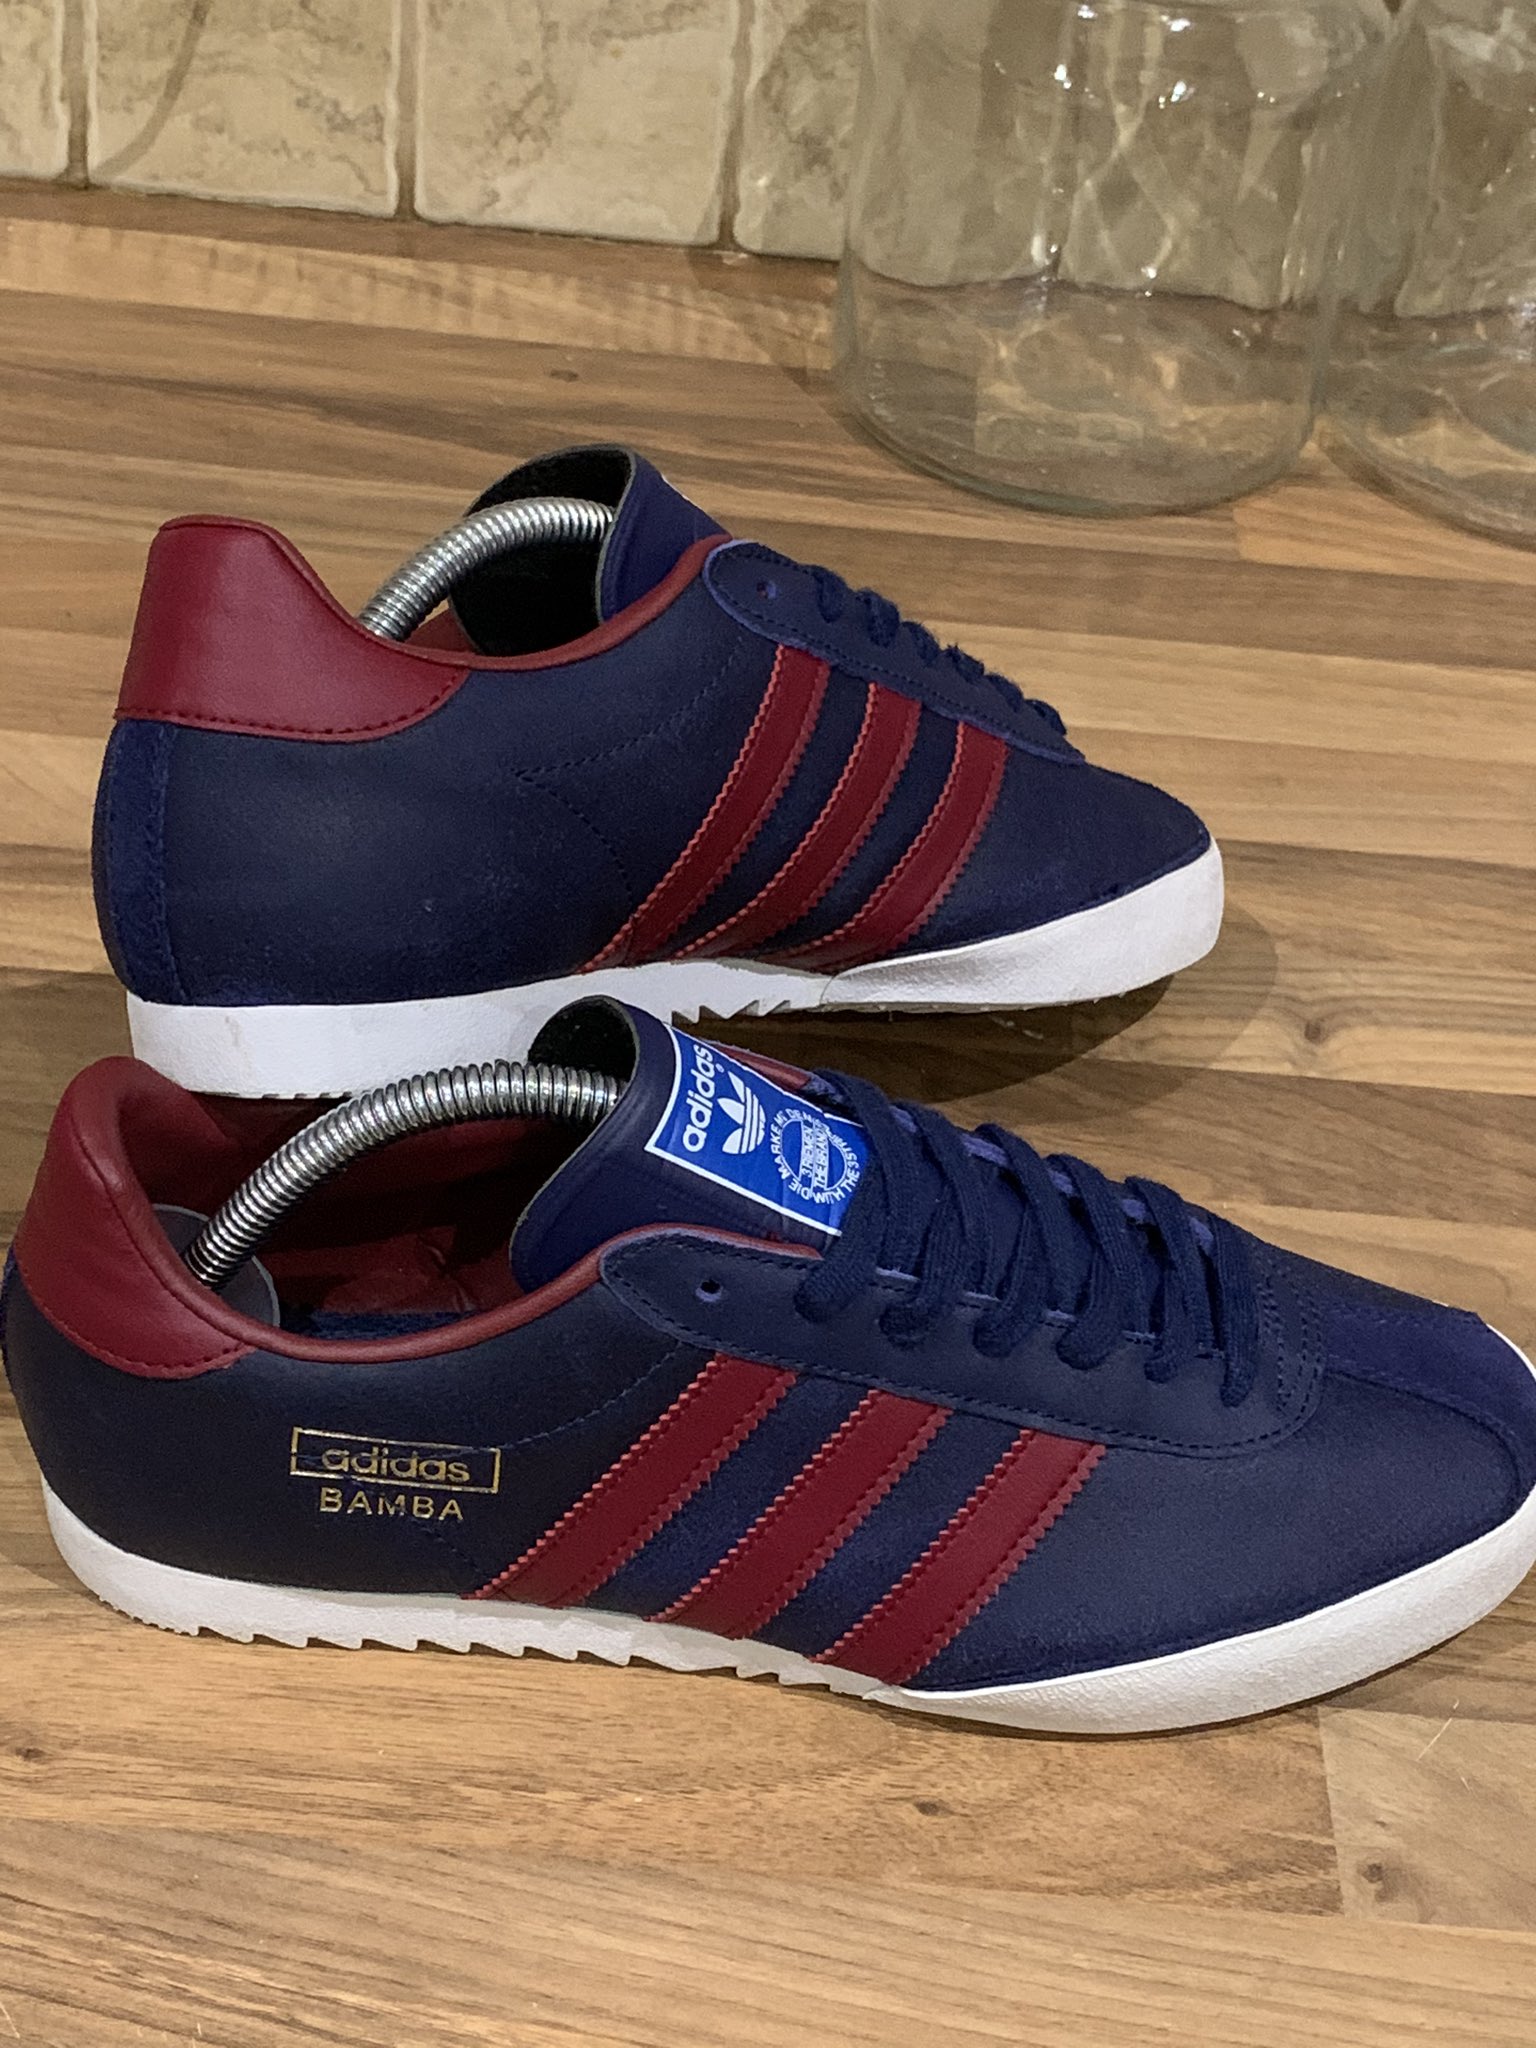 Proscrito a nombre de Mujer Mark Brown on Twitter: "Adidas BAMBA UK8 OG Box included £50 TYD please  retweet if possible https://t.co/NQ8cViNomQ" / Twitter